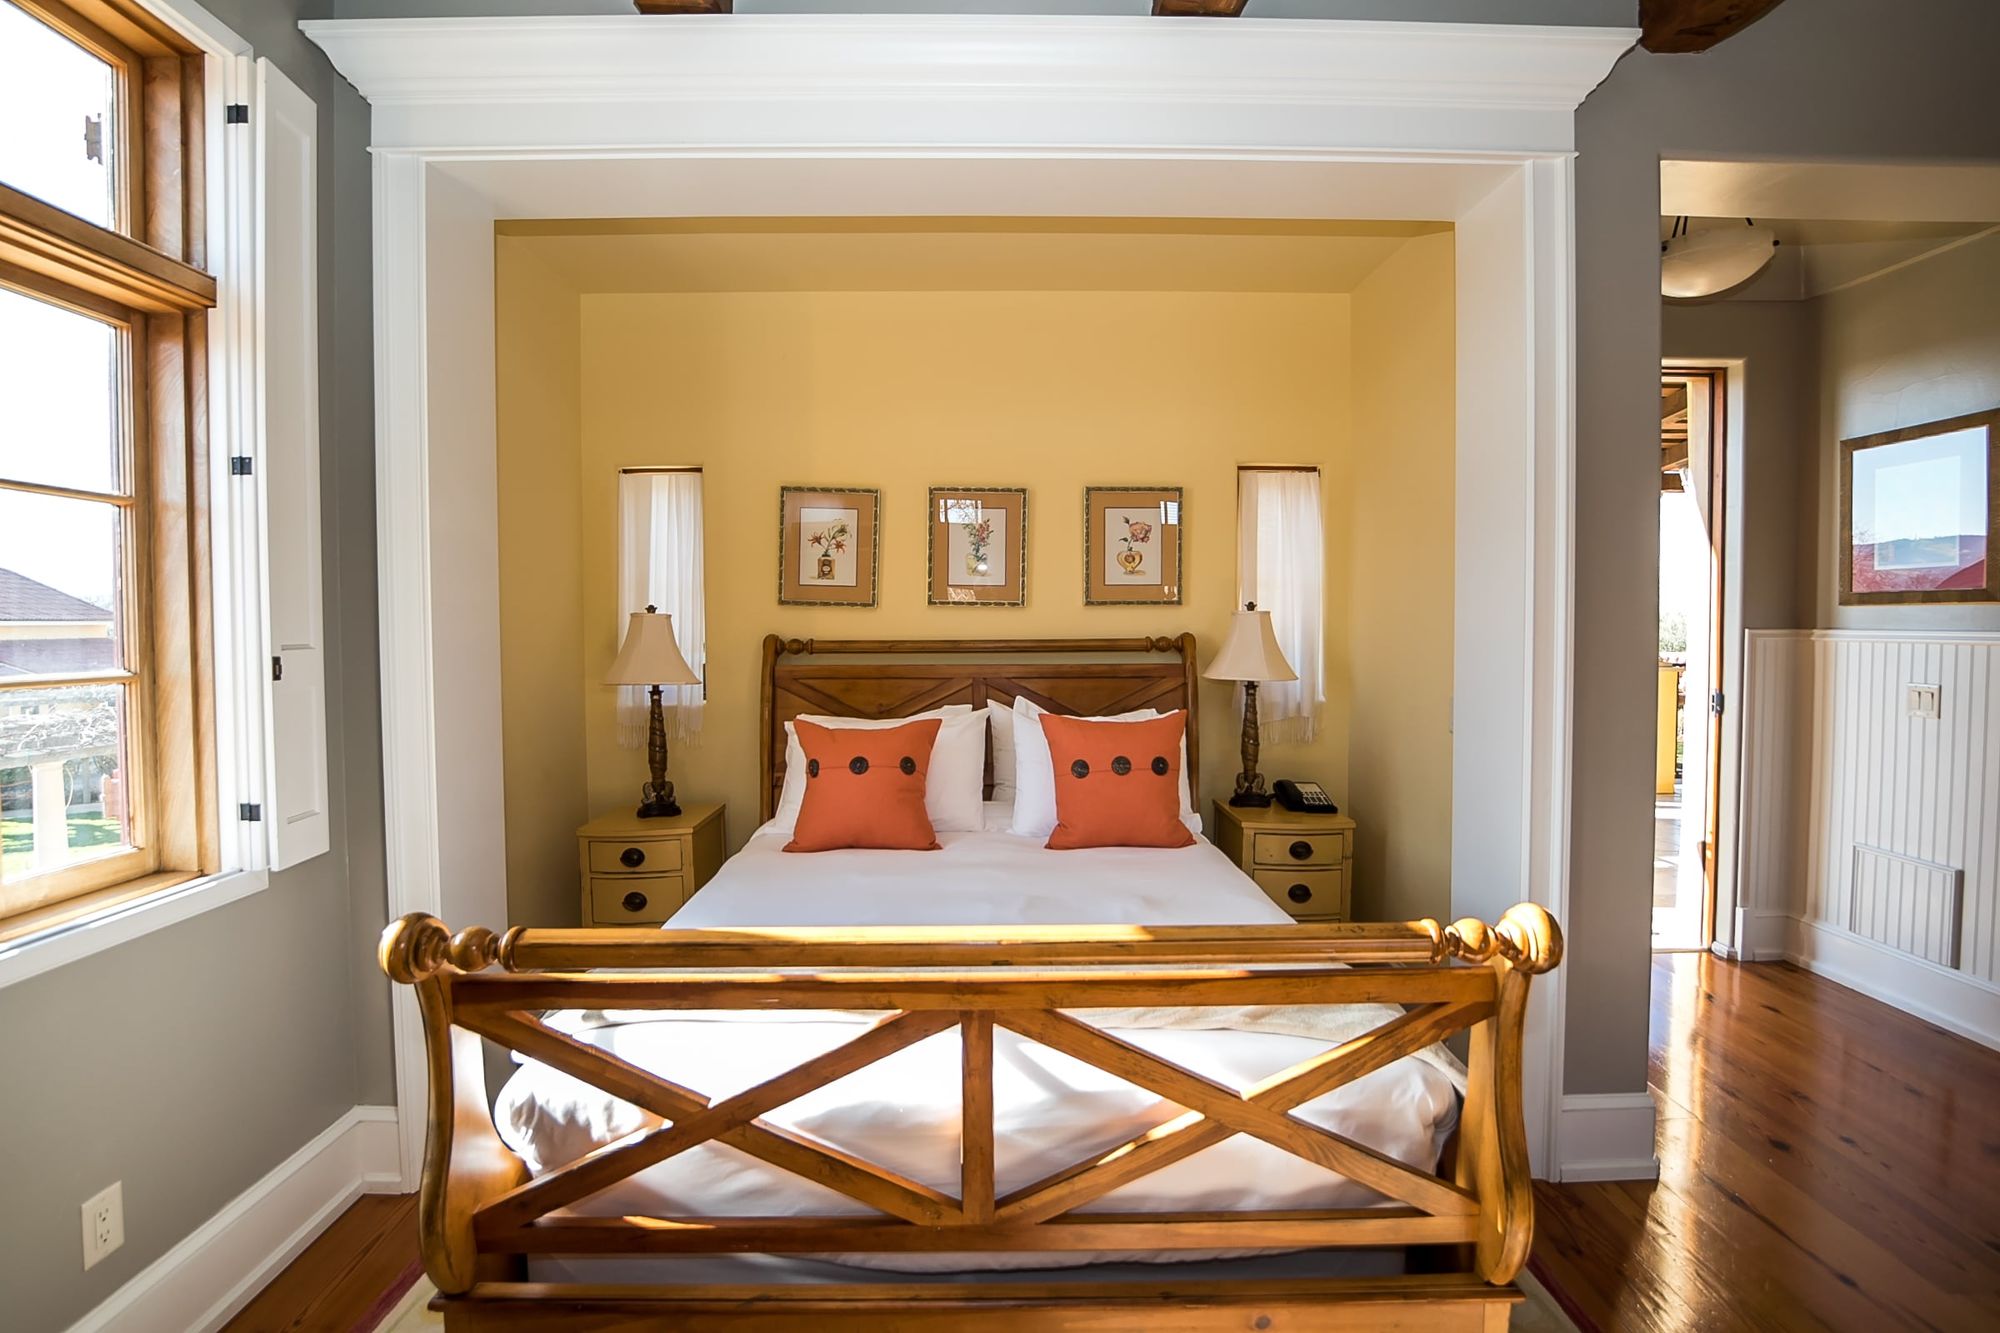 Sleigh bed made up with white sheets and orange accent pillows